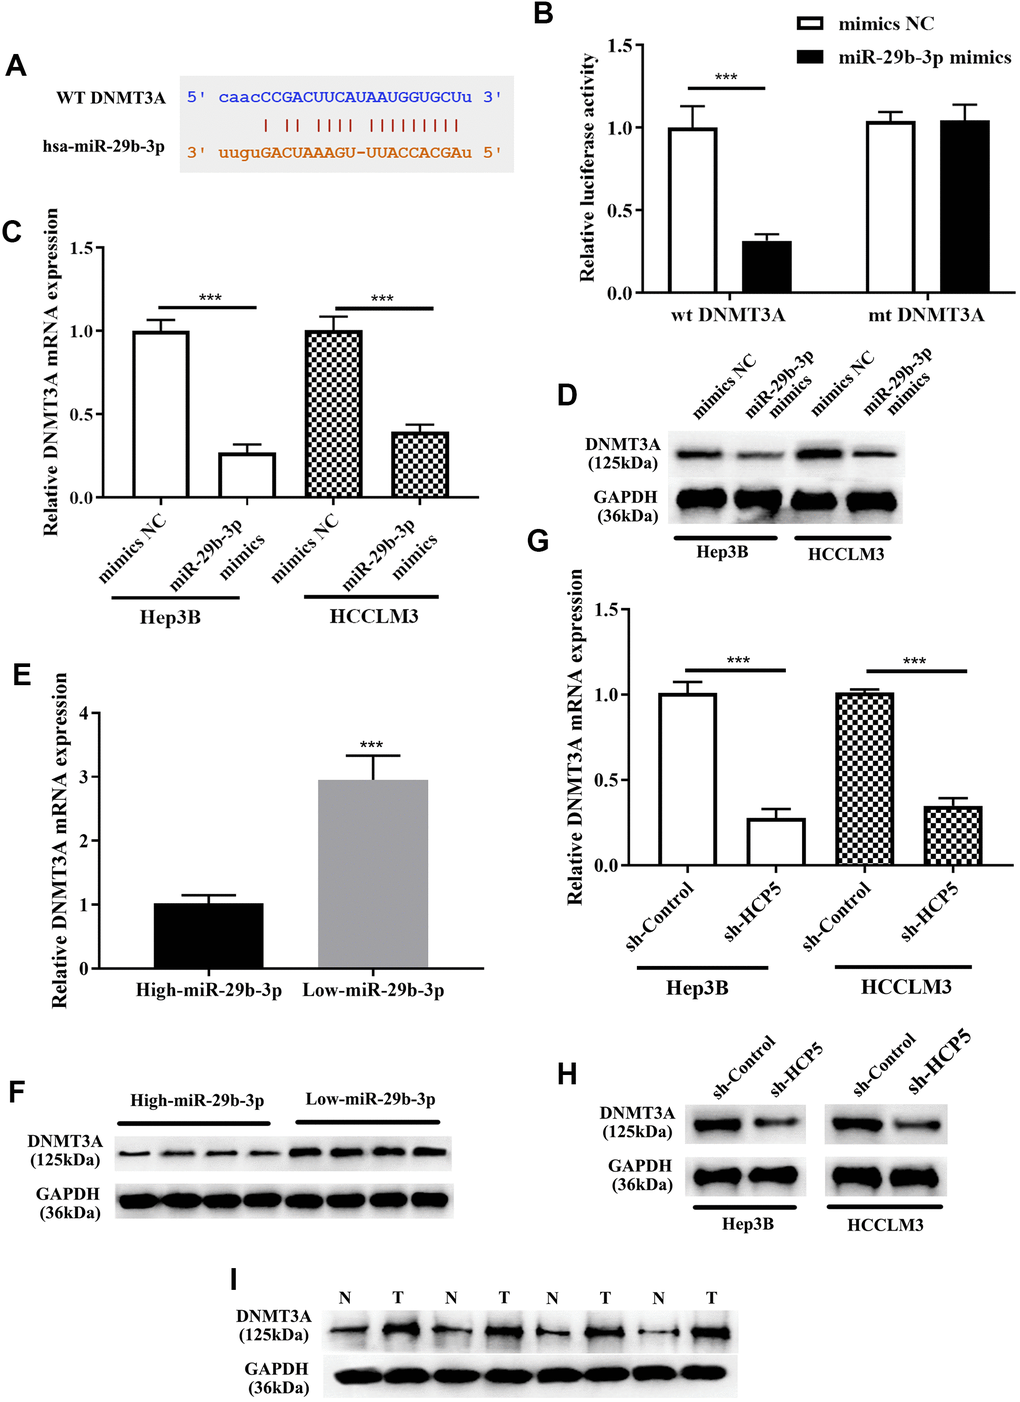 DNMT3A is a negative regulatory target gene of miR-29b-3p, and DNMT3A promotes hepatocellular carcinoma proliferation, metastasis and invasion. (A) Bioinformatics predictions showed that there is a direct binding site of miR-29b-3p on DNMT3A. (B) Dual luciferase assay demonstrating that there is a direct interaction between DNMT3A and miR-29b-3p (***pC, D) The results of qRT-PCR and Western blot analysis showing that overexpression of miR-29b-3p leads to down-regulation of DNMT3A in both HCCLM3 and Hep3B cells (***pE, F) qRT-PCR and Western blot analysis demonstrating that the expression of DNMT3A was negatively related to miR-29b-3p levels in HCC tissues. (G, H) The expression of DNMT3A was in proportion to that of HCP5. (I) Comparison of the expression of DNMT3A in HCC tissues (T) and non-tumor tissues (N) by Western blot analysis.